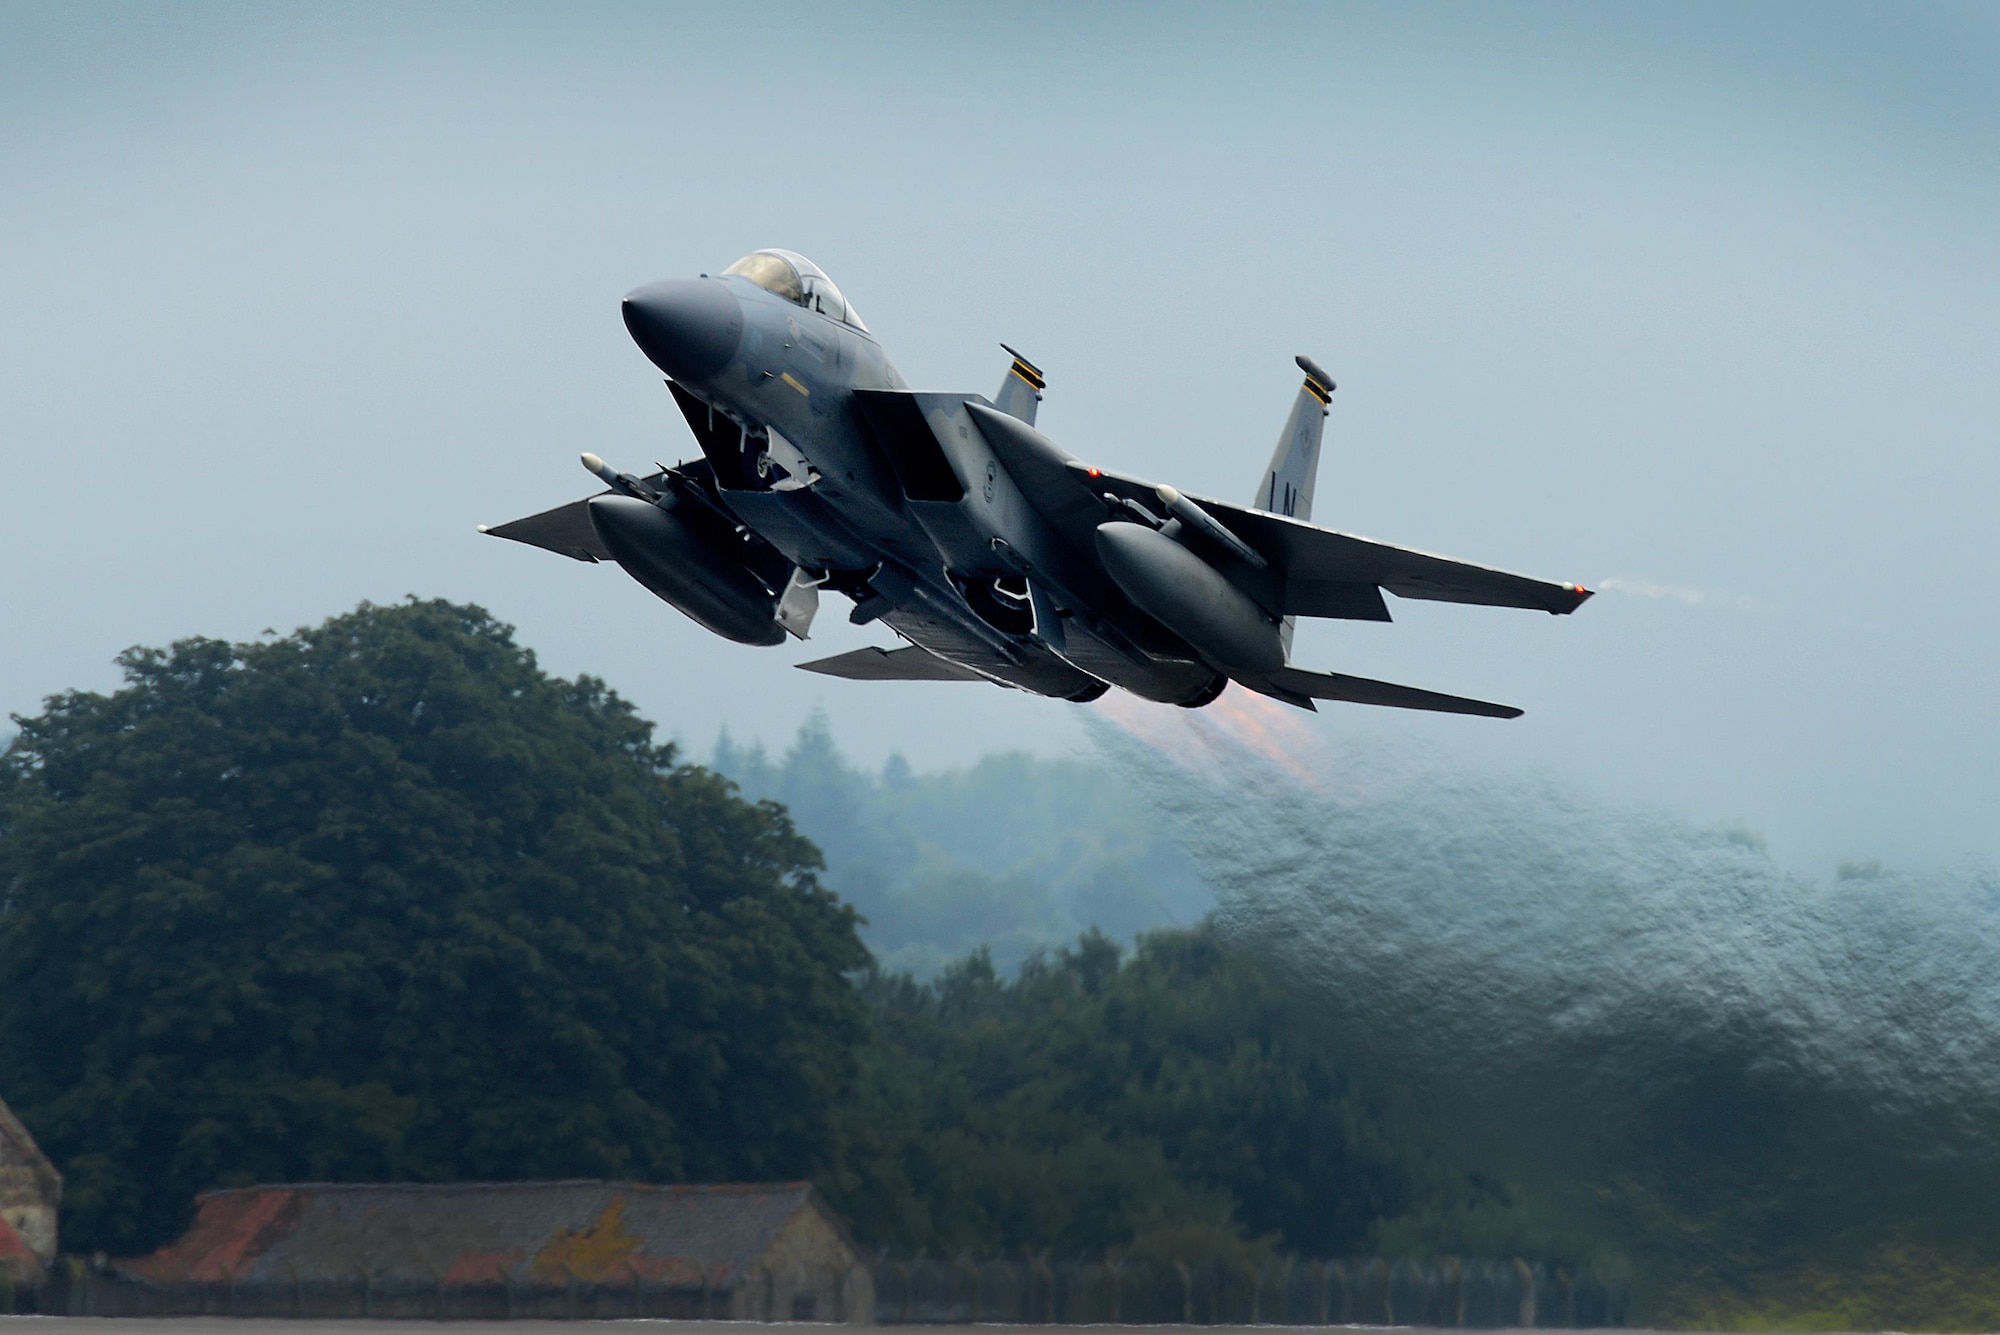 An F-15D Eagle assigned to the 493rd Fighter Squadron at Royal Air Force Lakenheath, England, launches for a sortie in support of a flying training exercise at Lakenheath with the 480th Fighter Squadron from Spangdahlem Air Base, Germany, July 25. The bilateral training event is designed to enhance interoperability, maintain joint readiness and reassure our regional Allies and partners of the U.S. Air Force’s commitment to a safe and secure Europe. (U.S. Air Force photo/ Tech. Sgt. Matthew Plew)